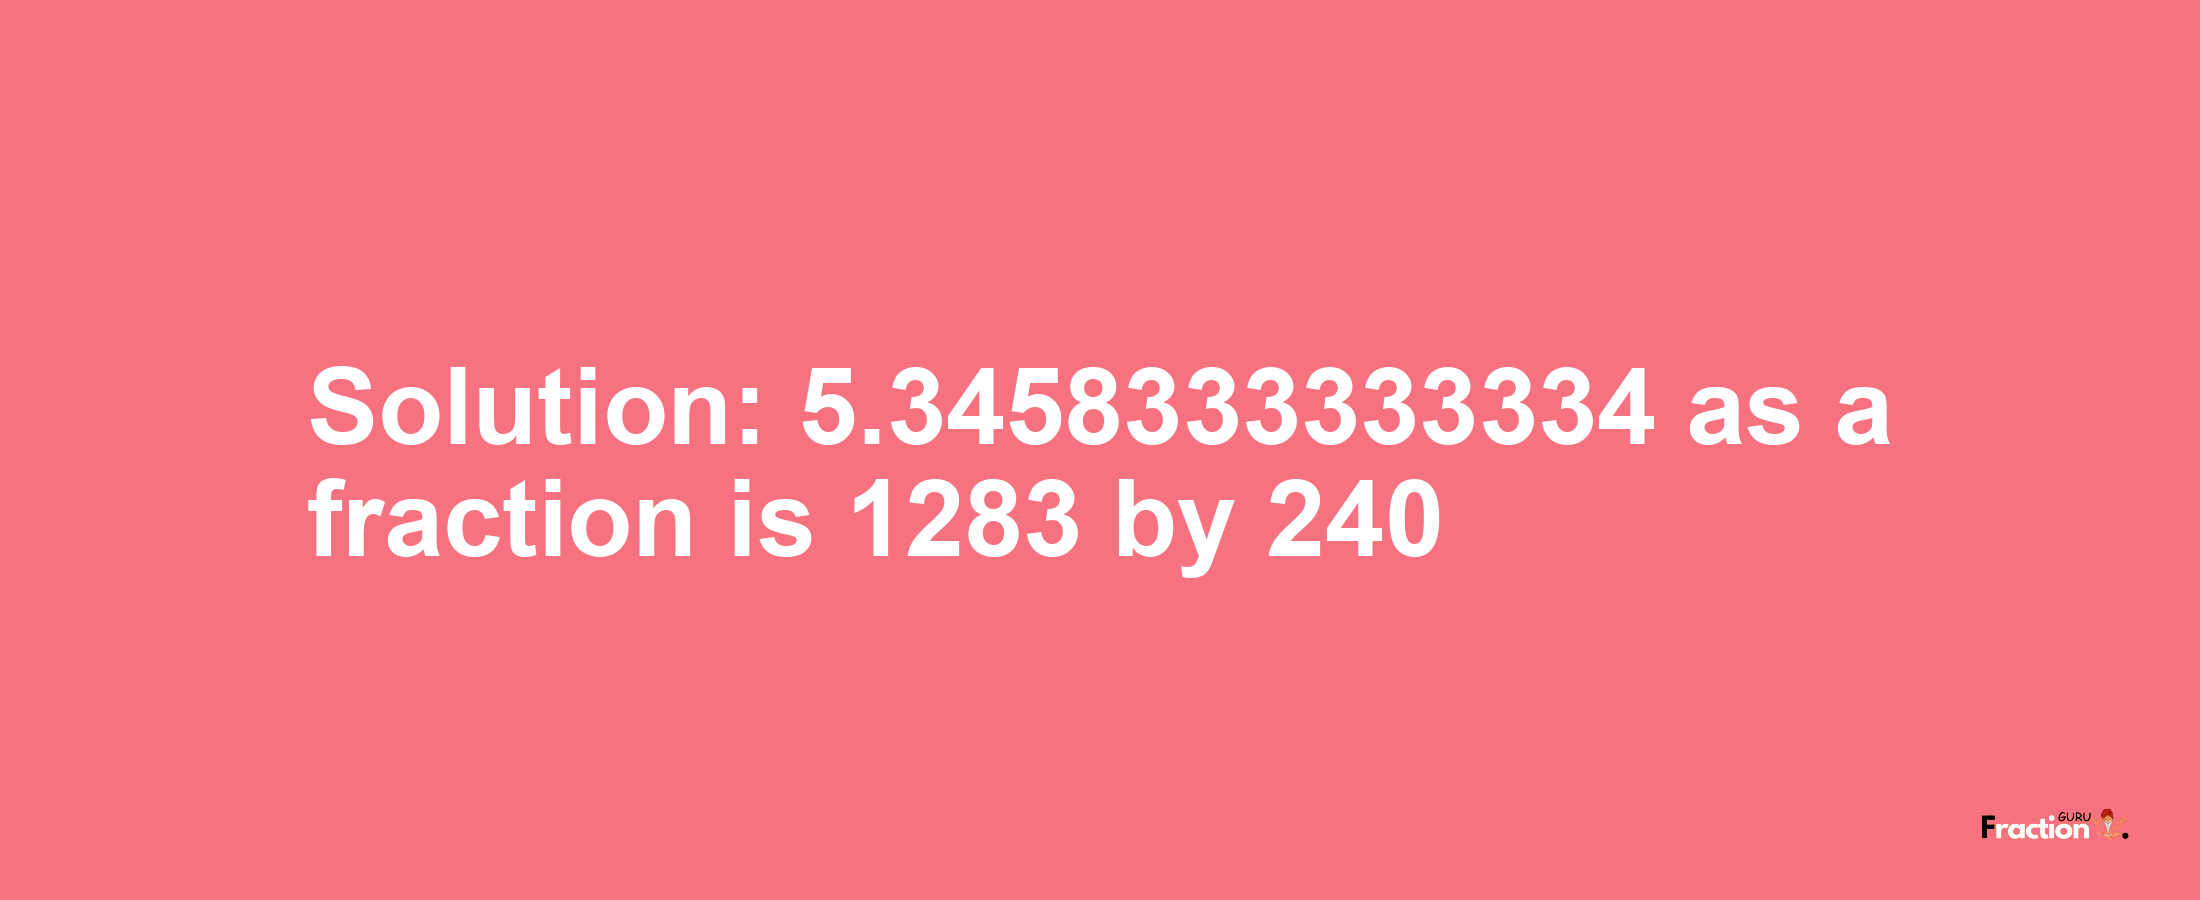 Solution:5.3458333333334 as a fraction is 1283/240